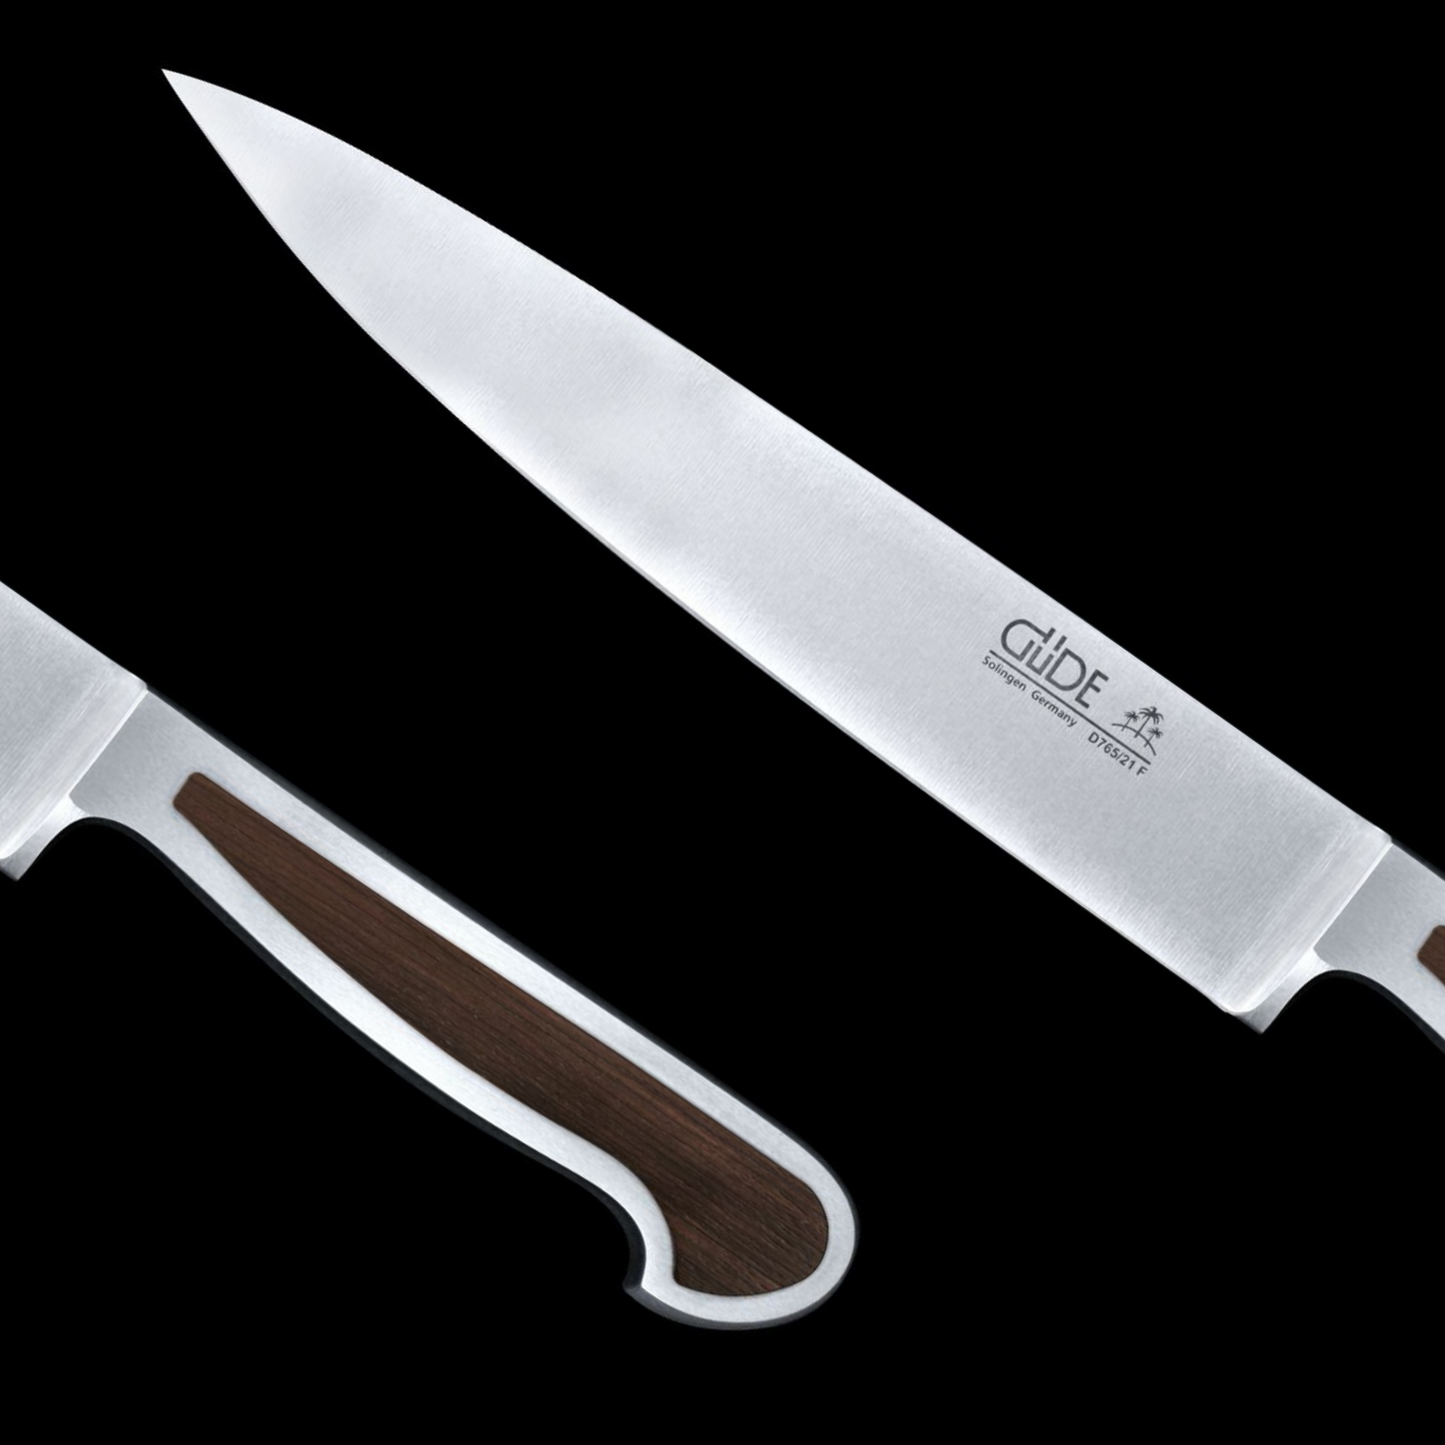 Gude Delta Series Forged Double Bolster Flexible Fillet Knife 8", African Black Wood Handle - GuedeUSA